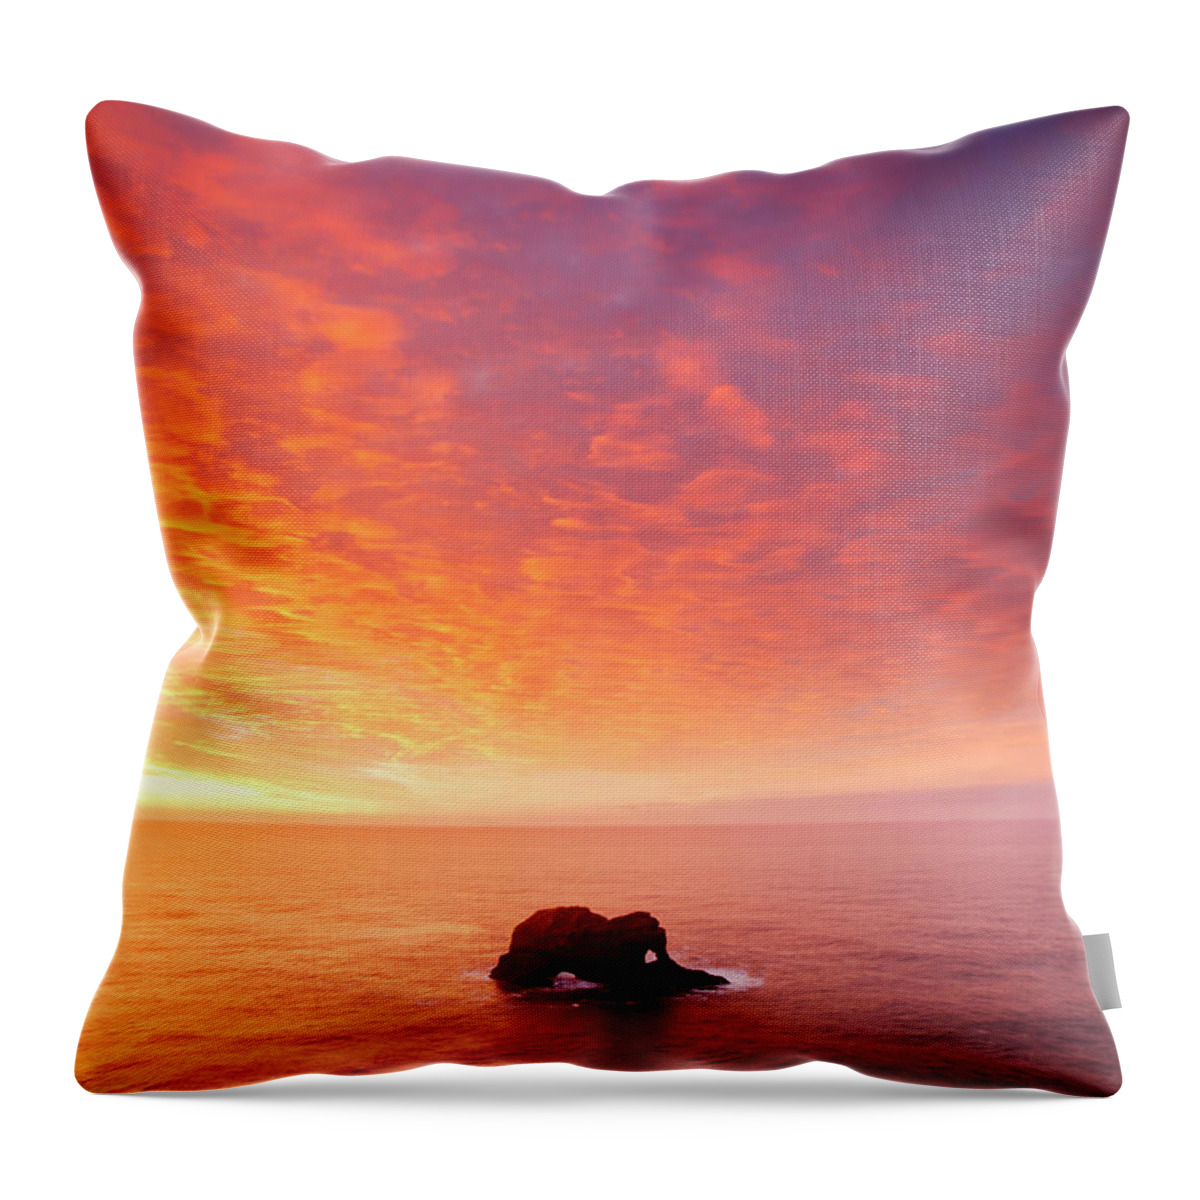 Estock Throw Pillow featuring the digital art Sea Stacks, Iceland by Vincenzo Mazza